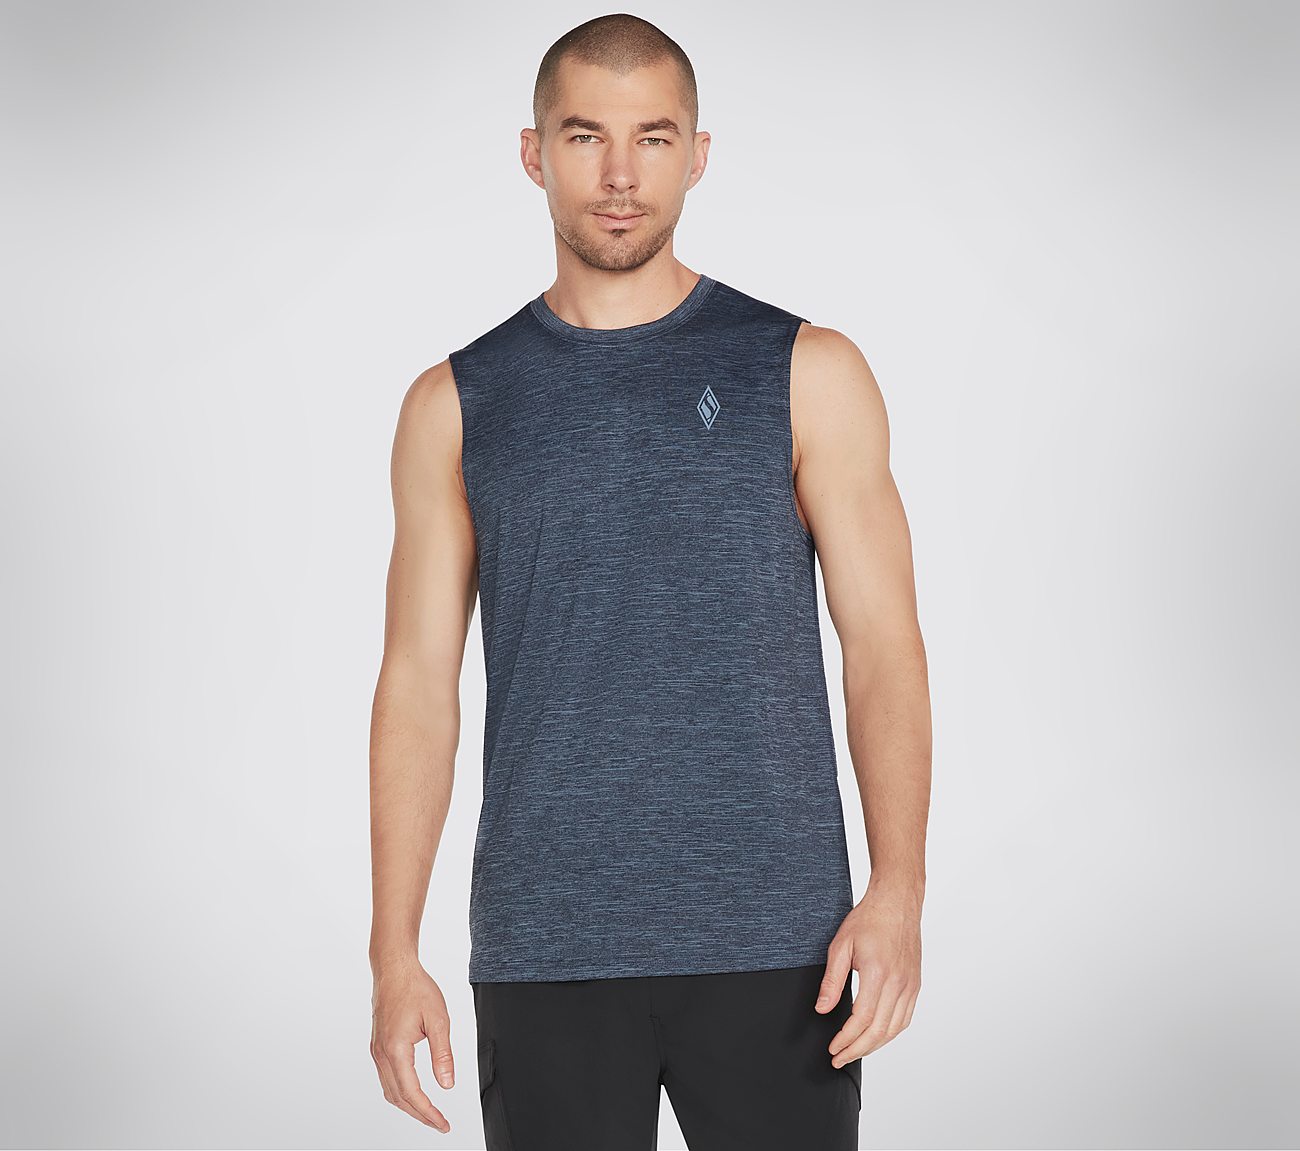 ON THE ROAD MUSCLE TANK, BLUE/GREY Apparels Lateral View